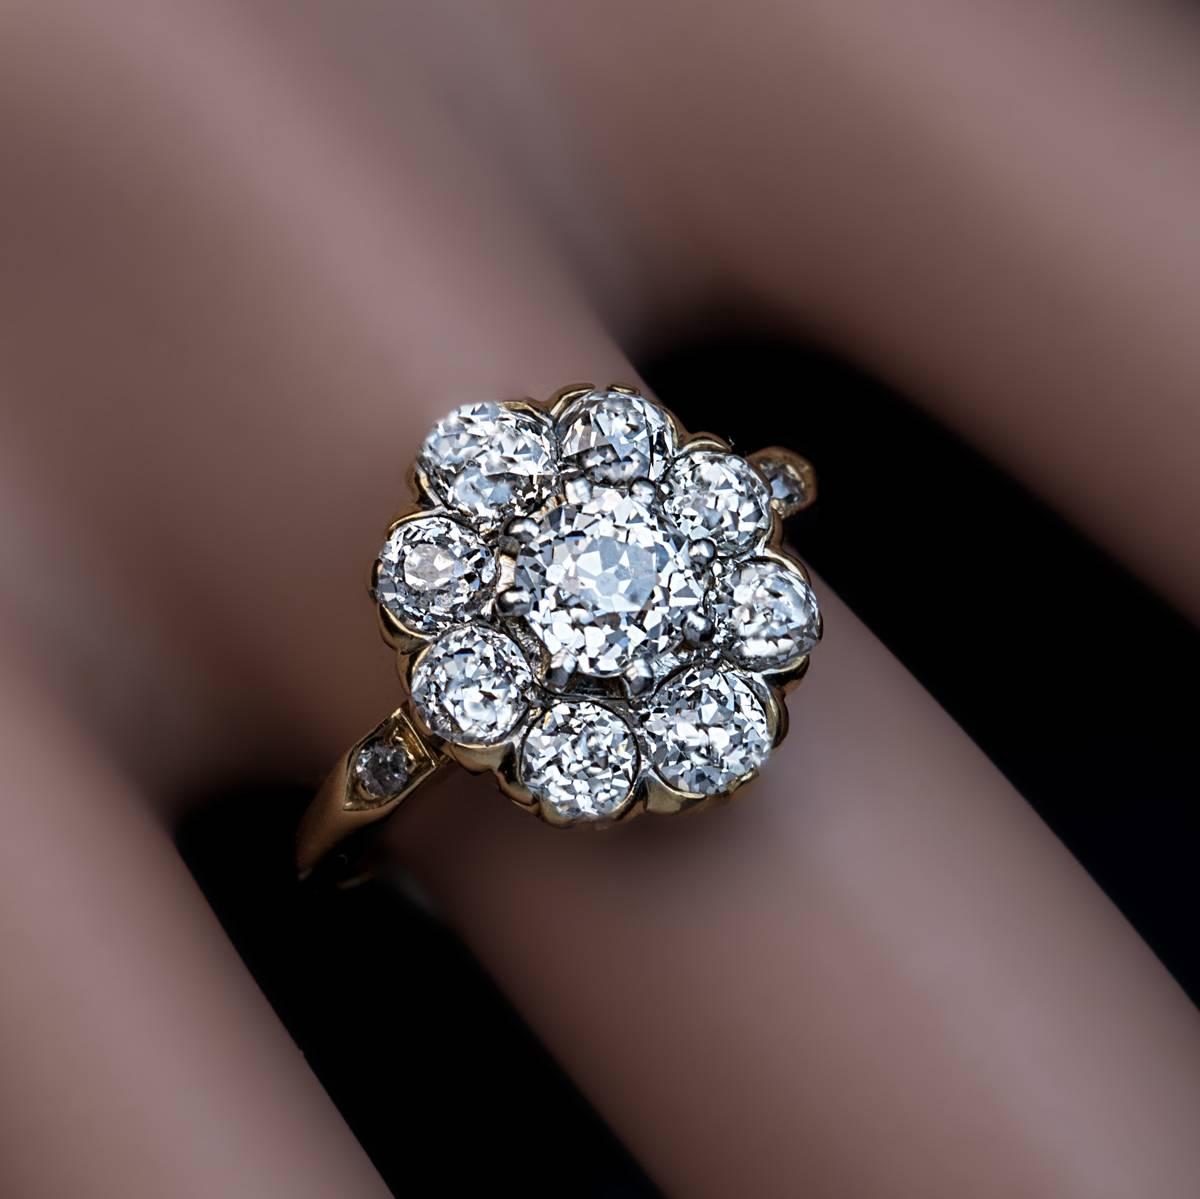 Circa 1915

An 18K gold diamond cluster ring of a classical design is centered with a sparkling old cushion cut diamond (5.1 x 4.9 x 3.6 mm, approximately 0.69 ct) set in platinum prongs surrounded by eight old mine cut diamonds set in gold. The